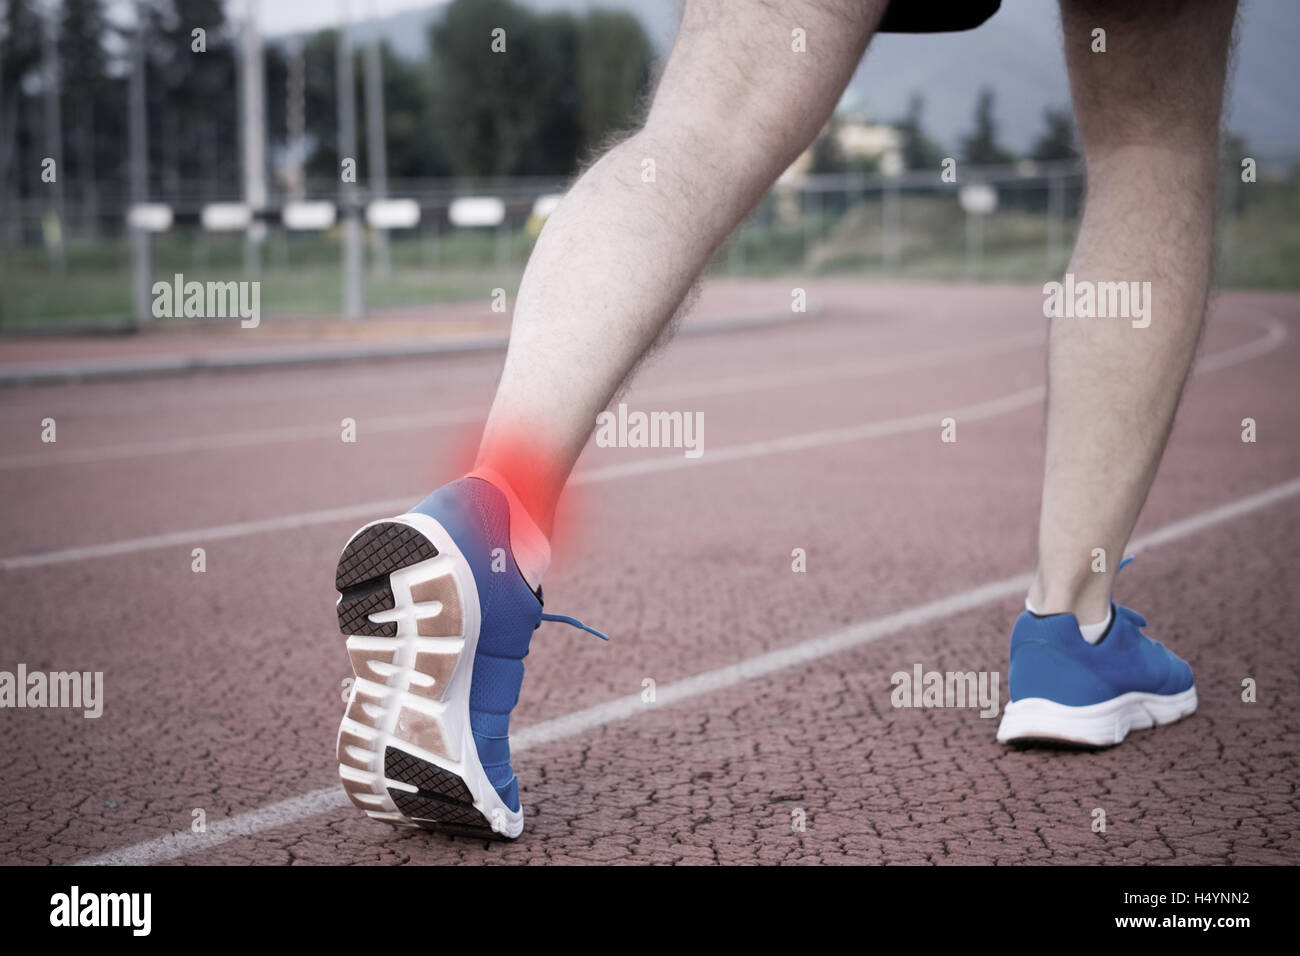 Runner with injured ankle on the track Stock Photo